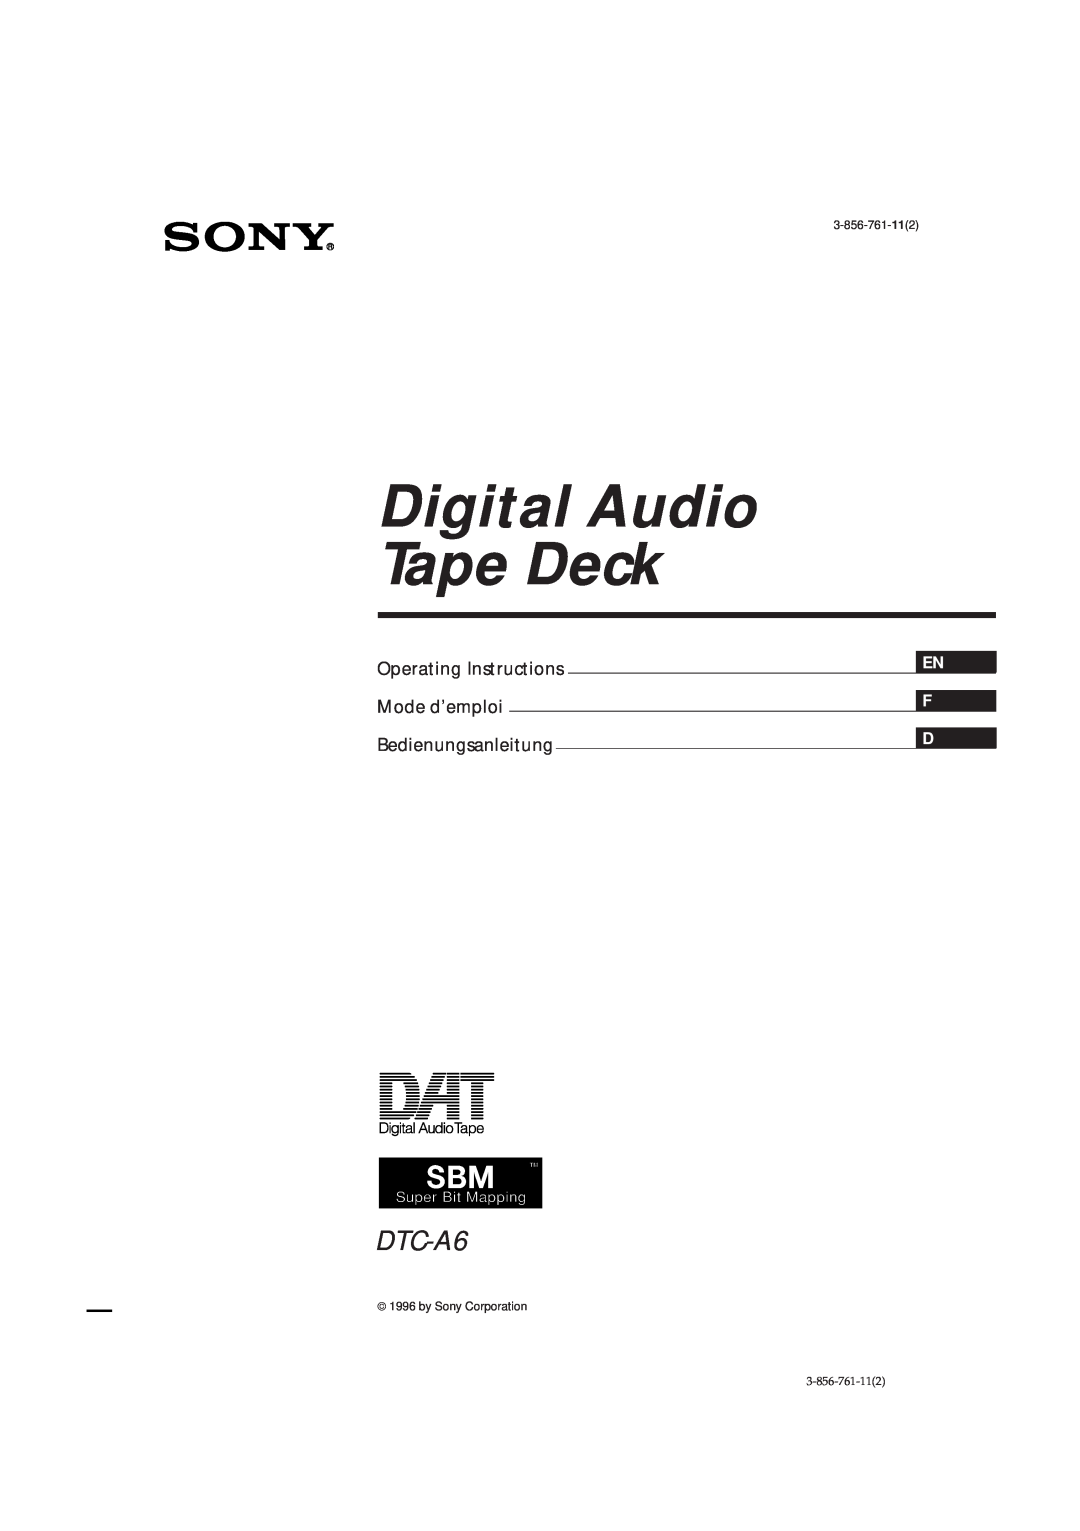 Sony DTC-A6 operating instructions Operating Instructions, Mode d’emploi, Bedienungsanleitung, Digital Audio Tape Deck 